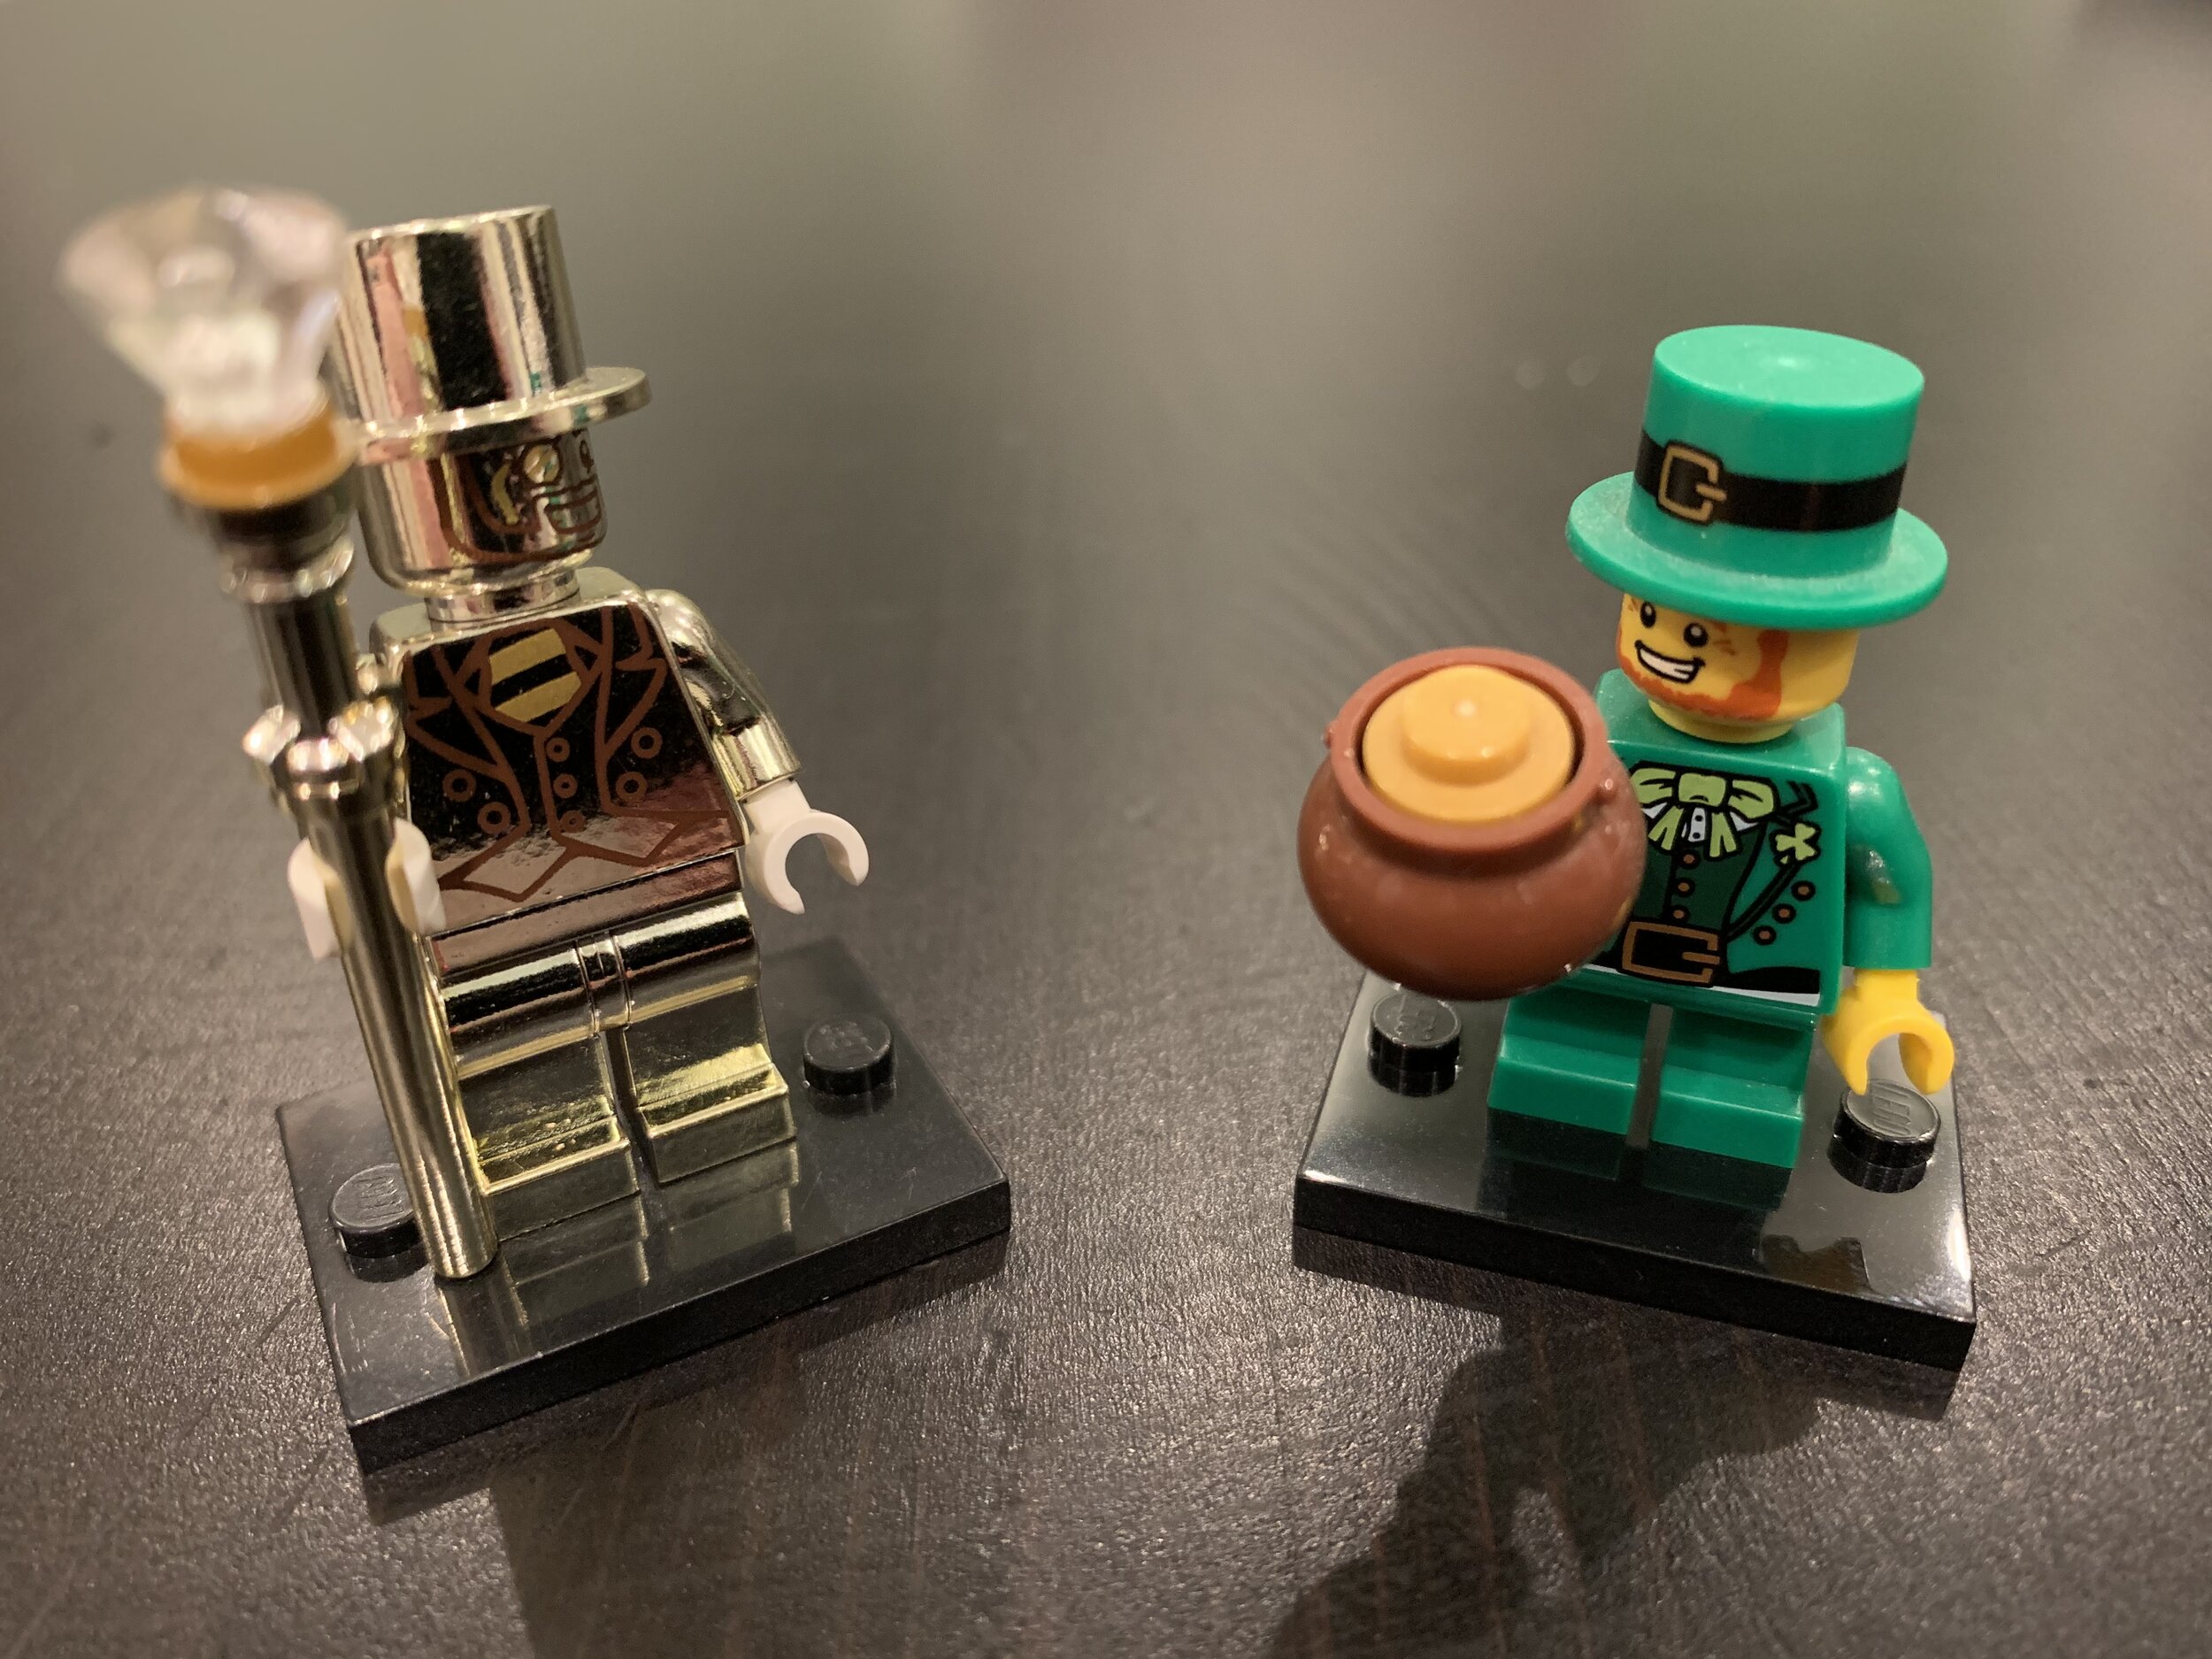 grænse Oxide sensor How I Ended Up With the World's Cheapest Mr. Gold - BrickNerd - All things  LEGO and the LEGO fan community